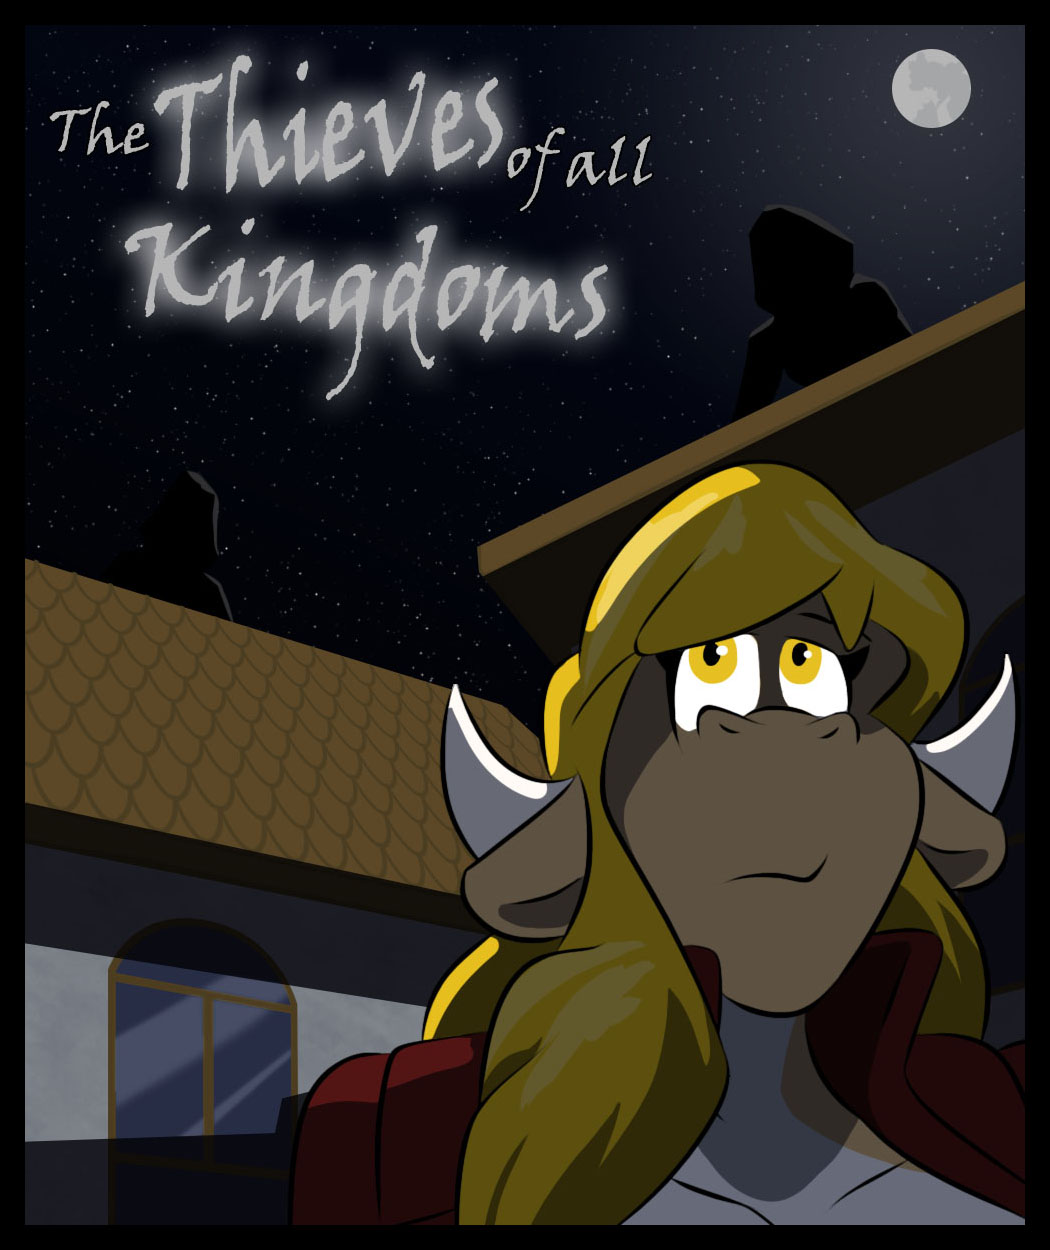 The Thieves of all Kingdoms